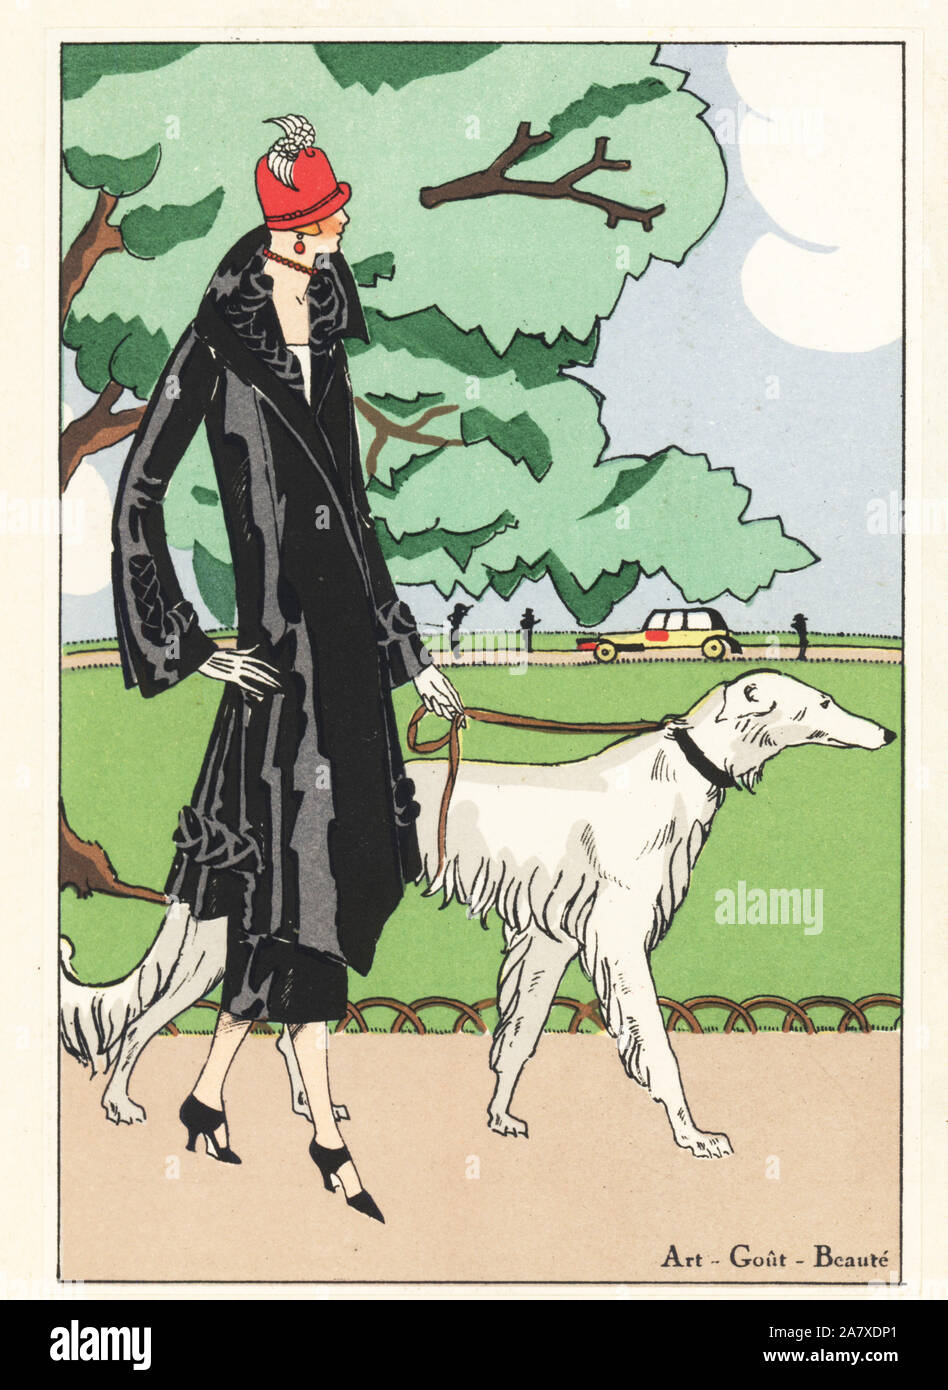 Woman in black ottoman three-piece ensemble walking a Borzoi dog in a park. Handcolored pochoir (stencil) lithograph from the French luxury fashion magazine Art, Gout, Beaute, 1925. Stock Photo